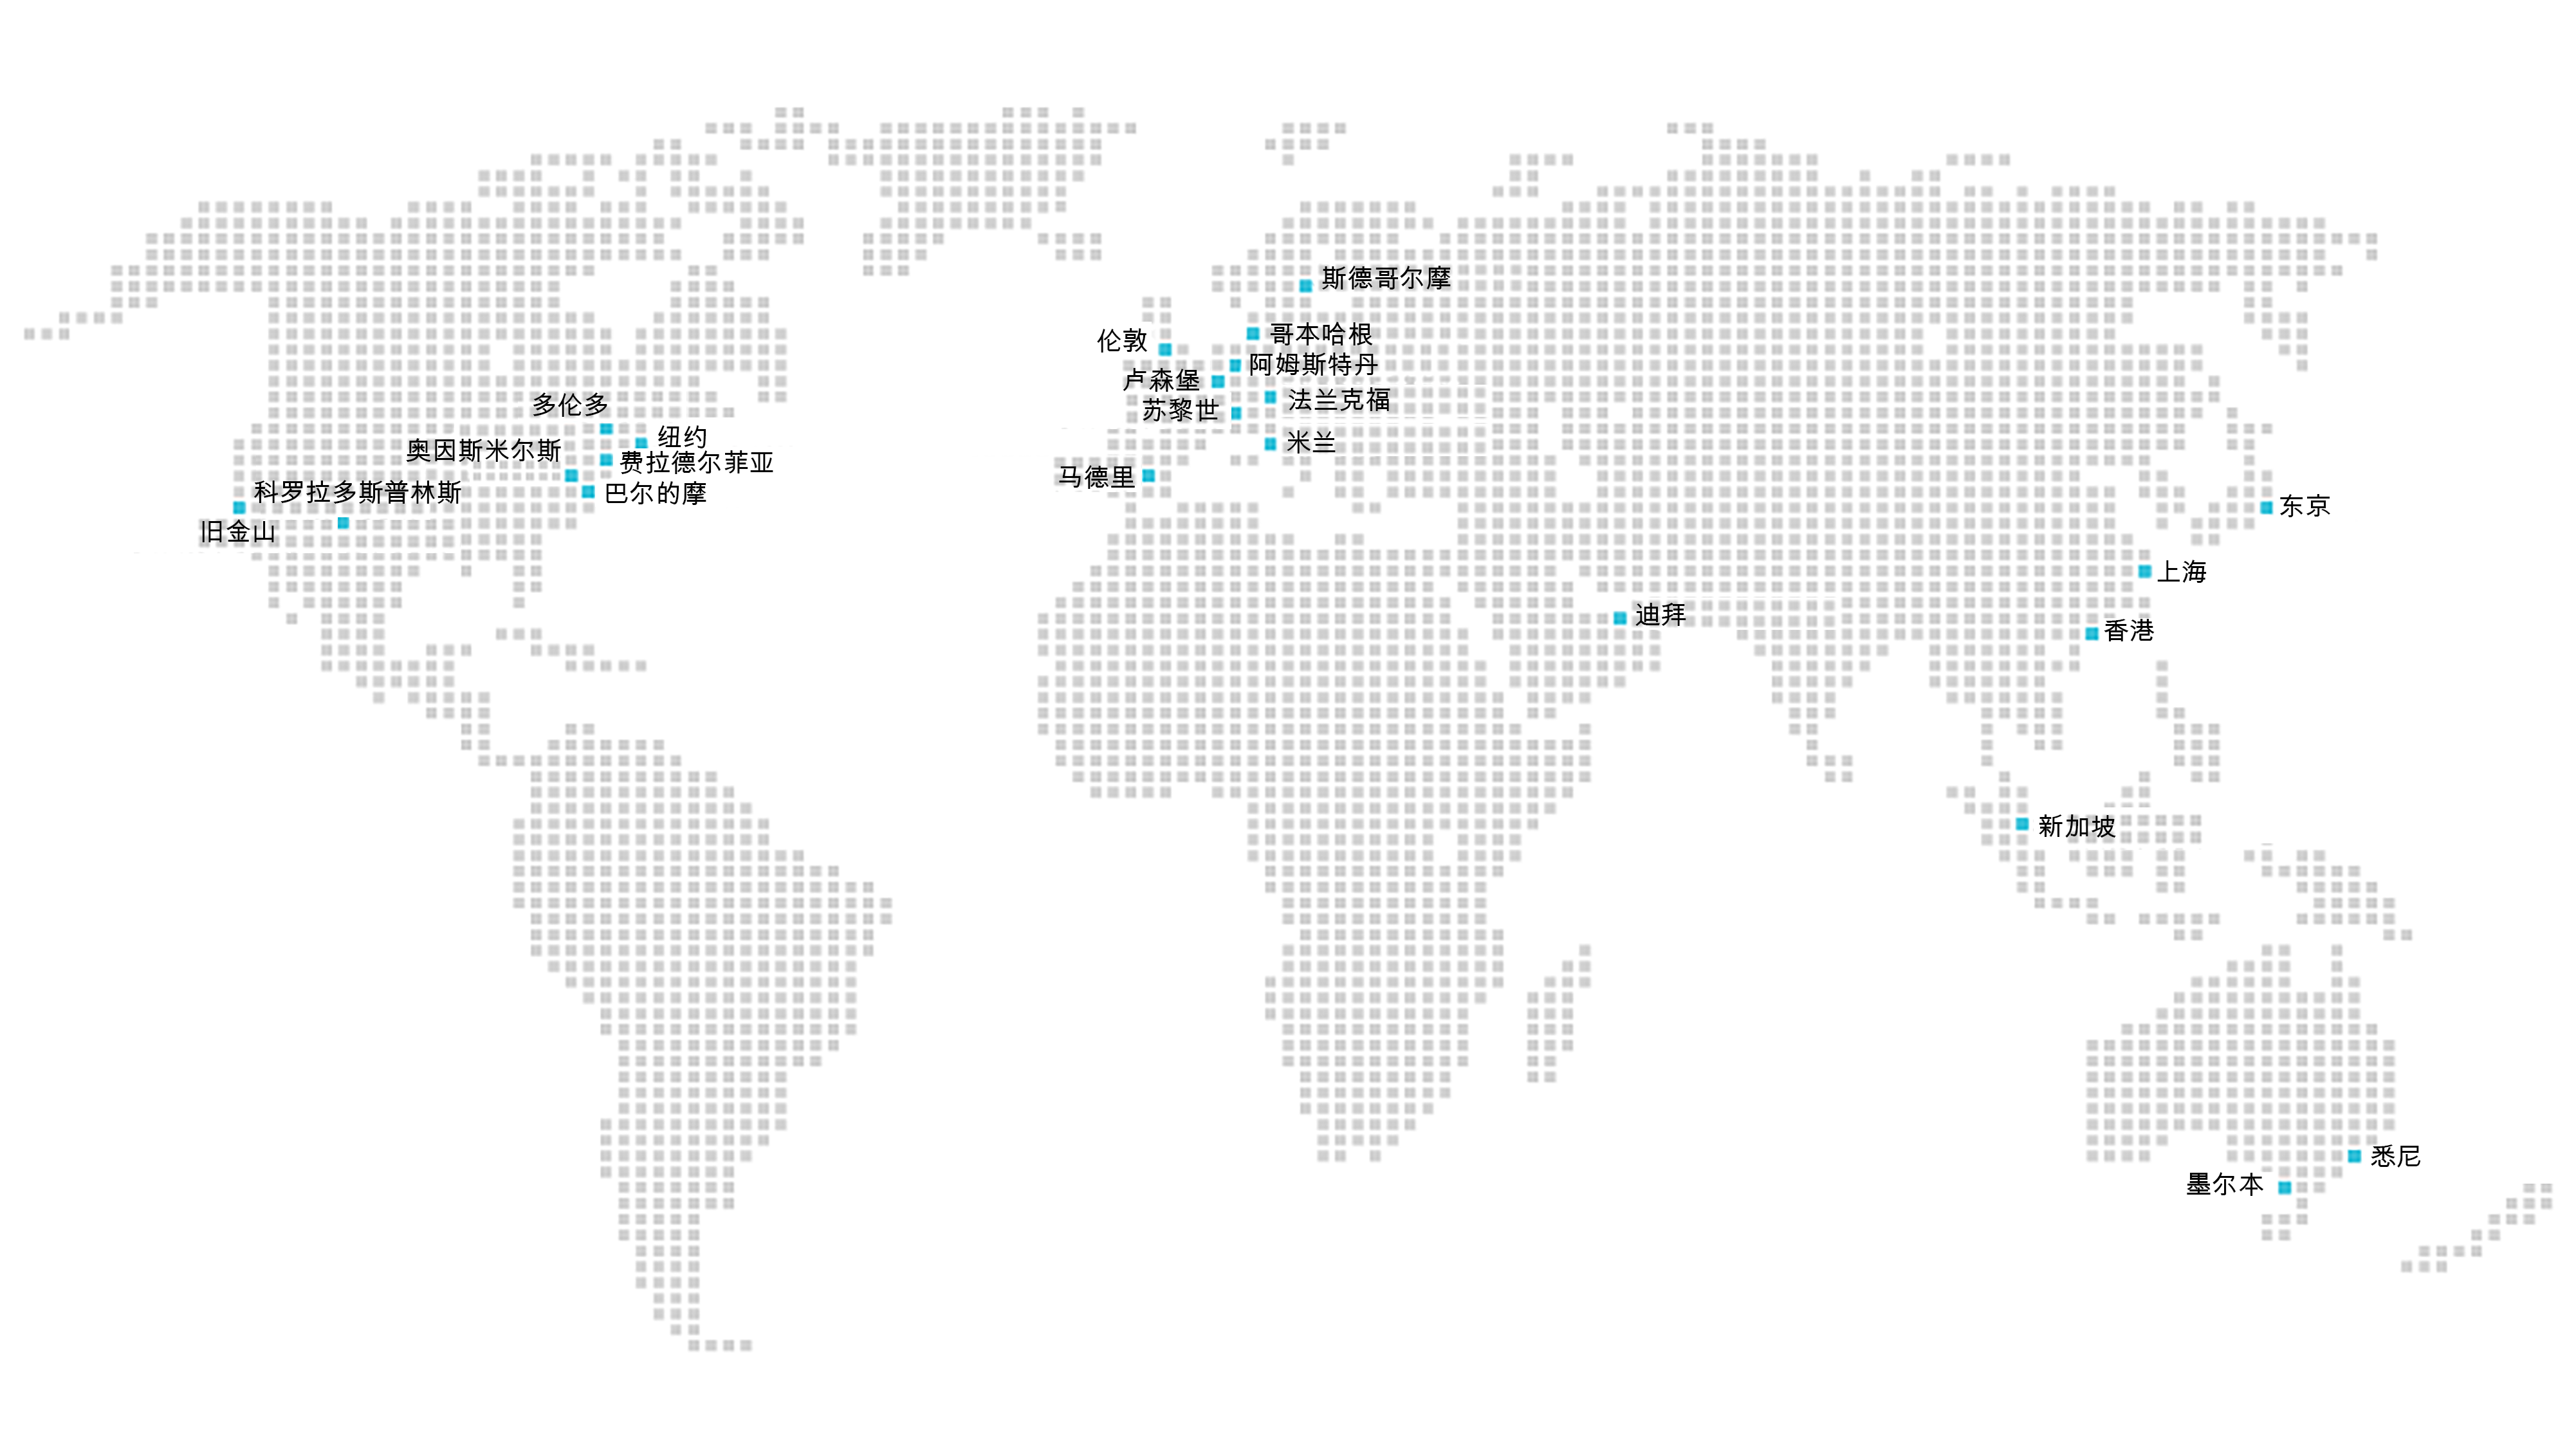  Locations of T. Rowe Price regional offices